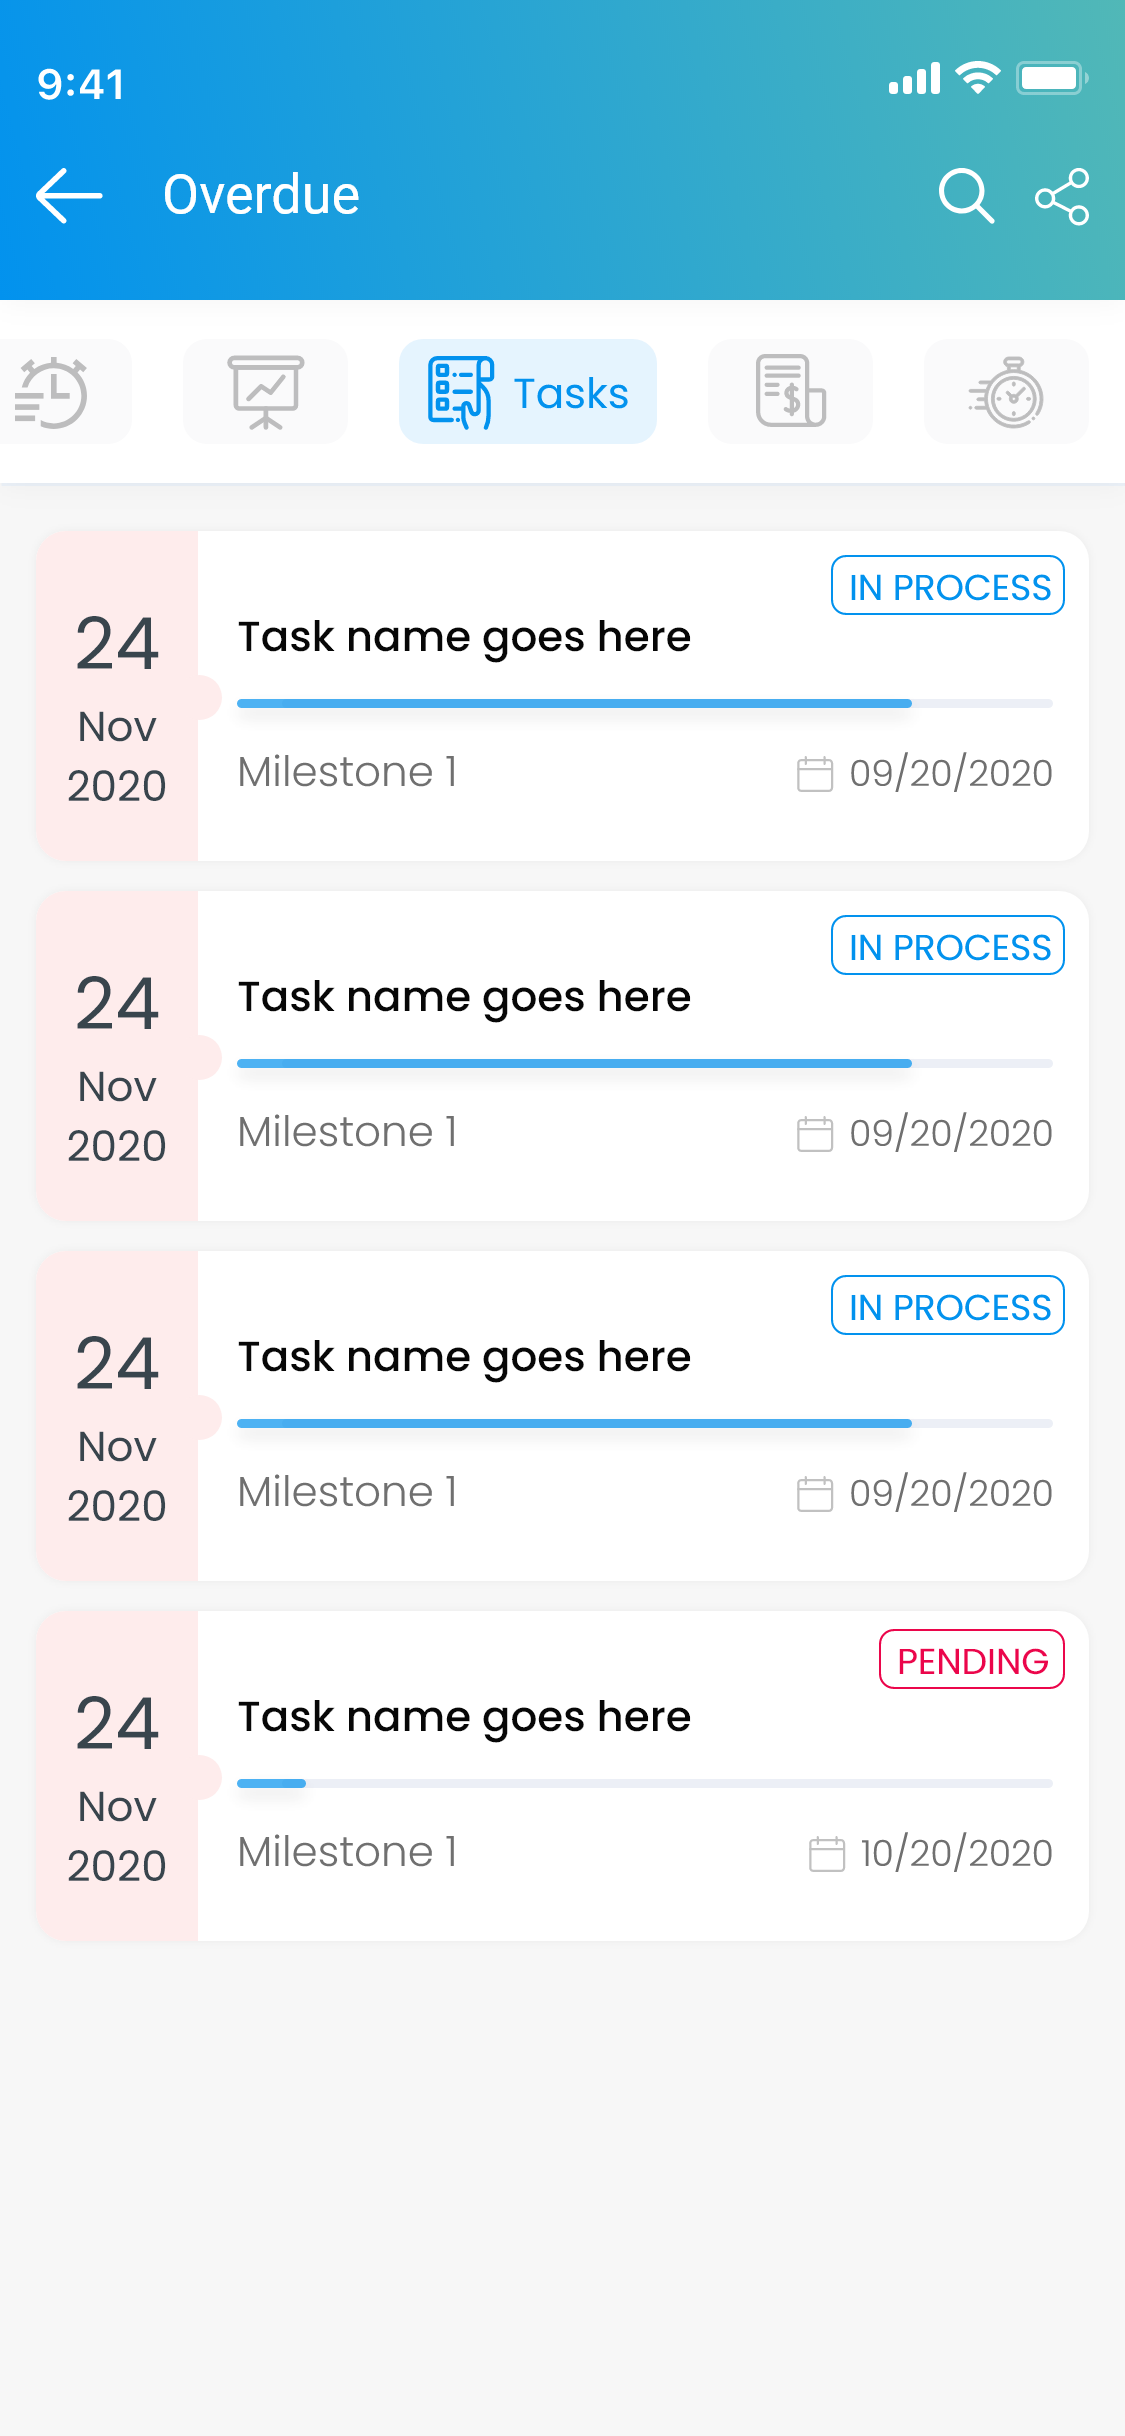 13 Overdue - Tasks page